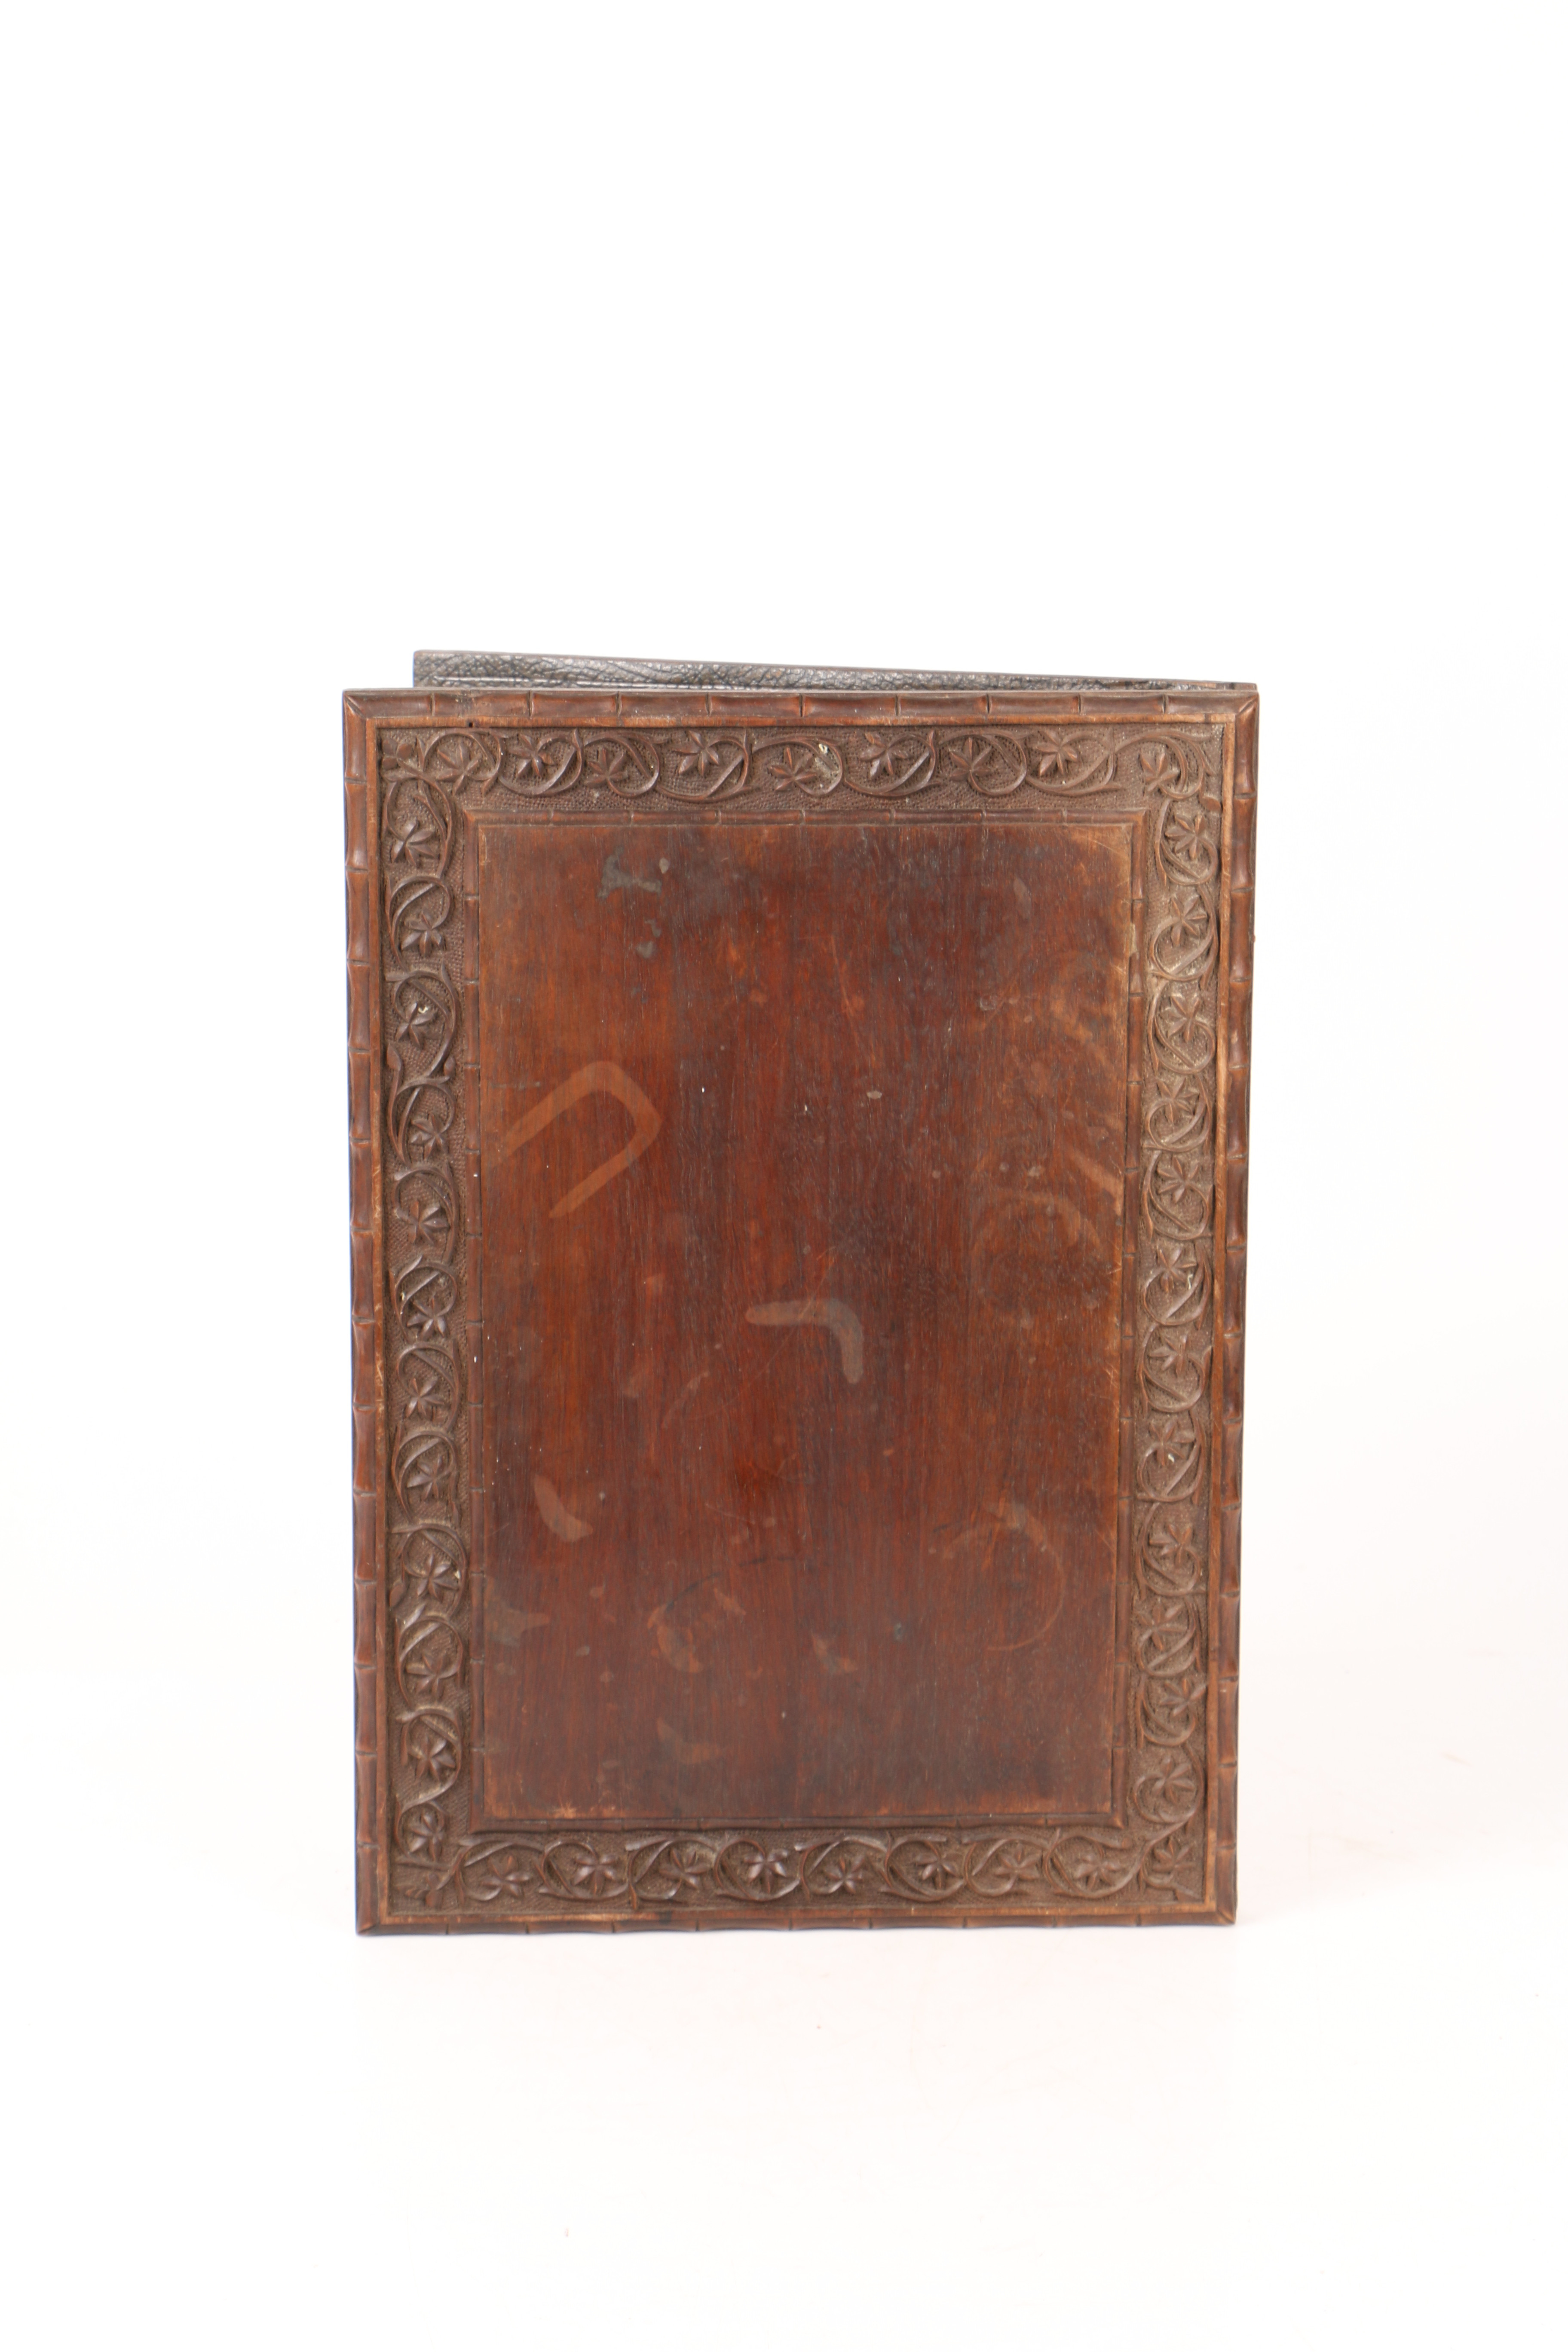 A 19TH CENTURY ANGLO INDIAN HARDWOOD BOOK COVER. - Image 3 of 4